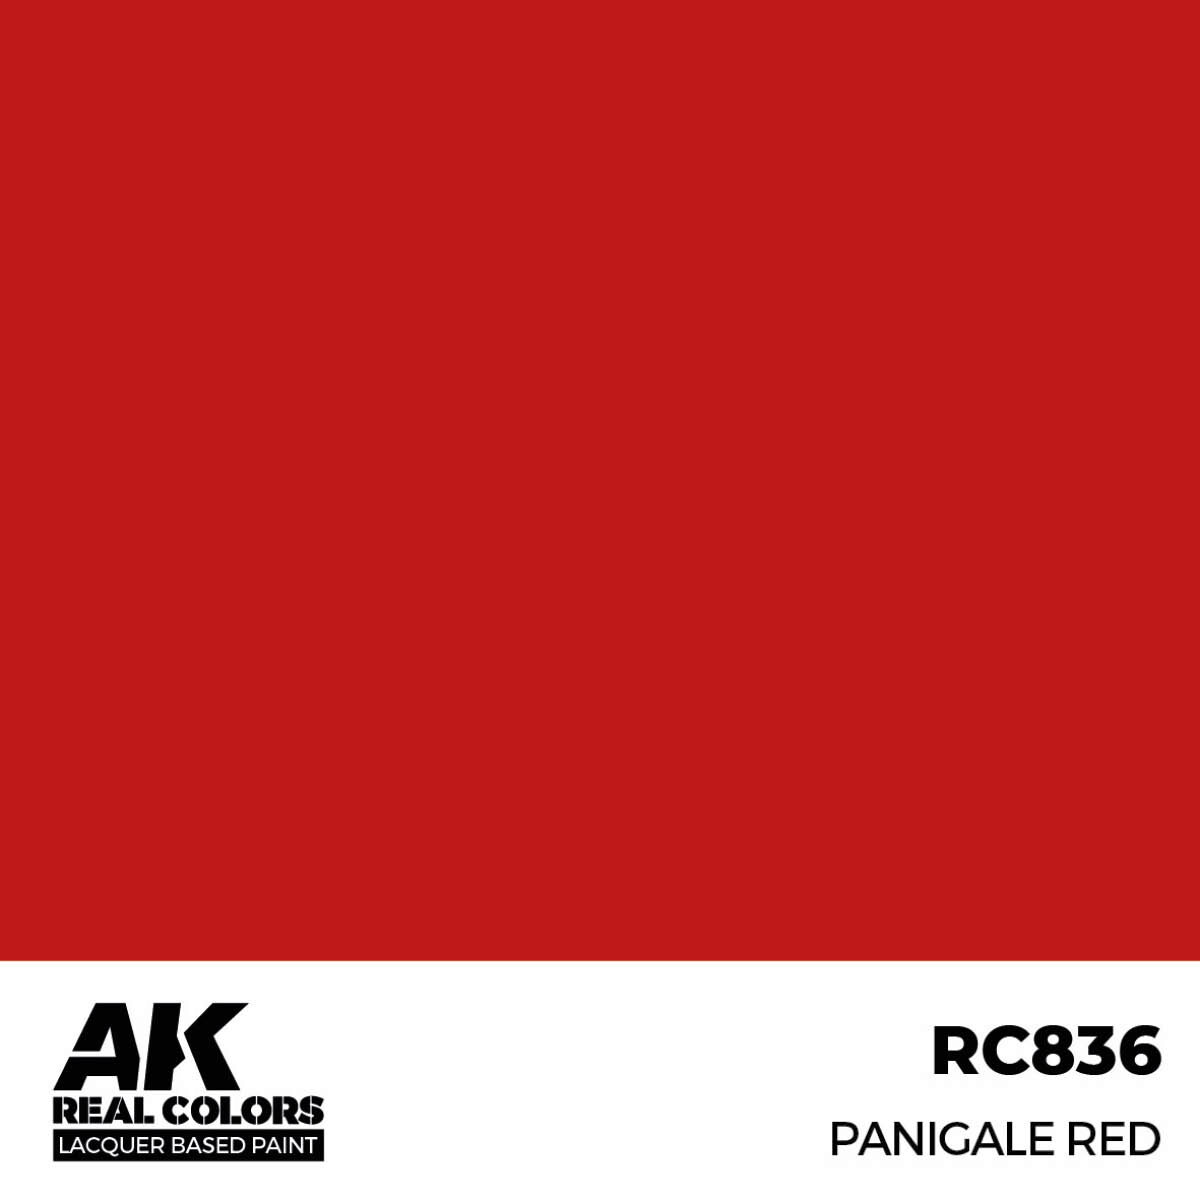 AK RC836 Real Colors Panigale Red 17 ml.